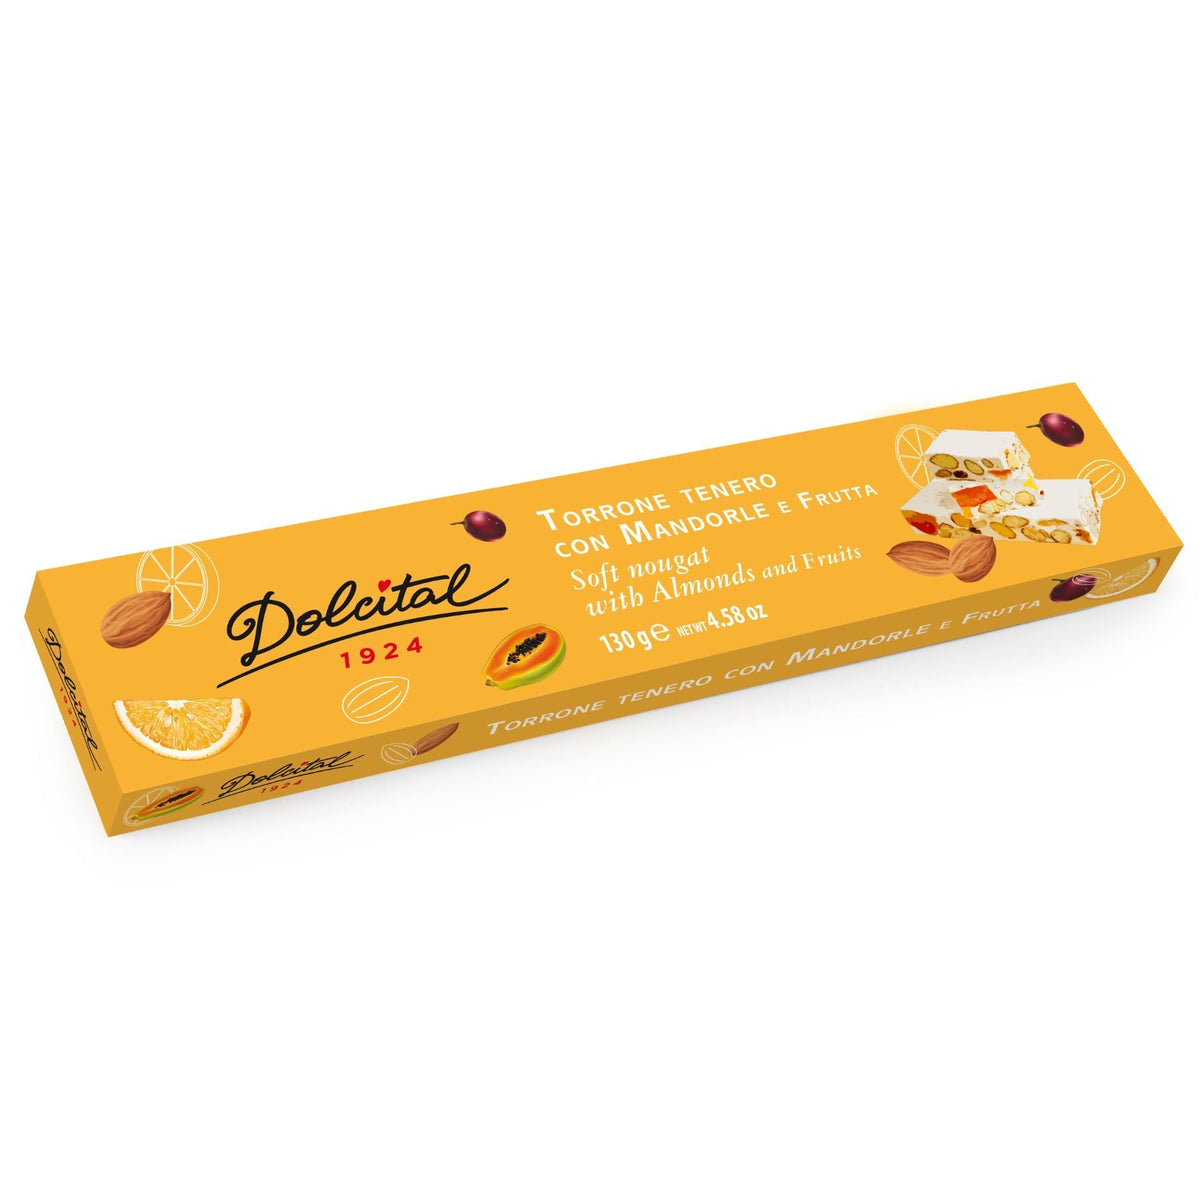 Dolcital Almond &amp; Fruit Soft Nougat 130g (Box)  | Imported and distributed in the UK by Just Gourmet Foods